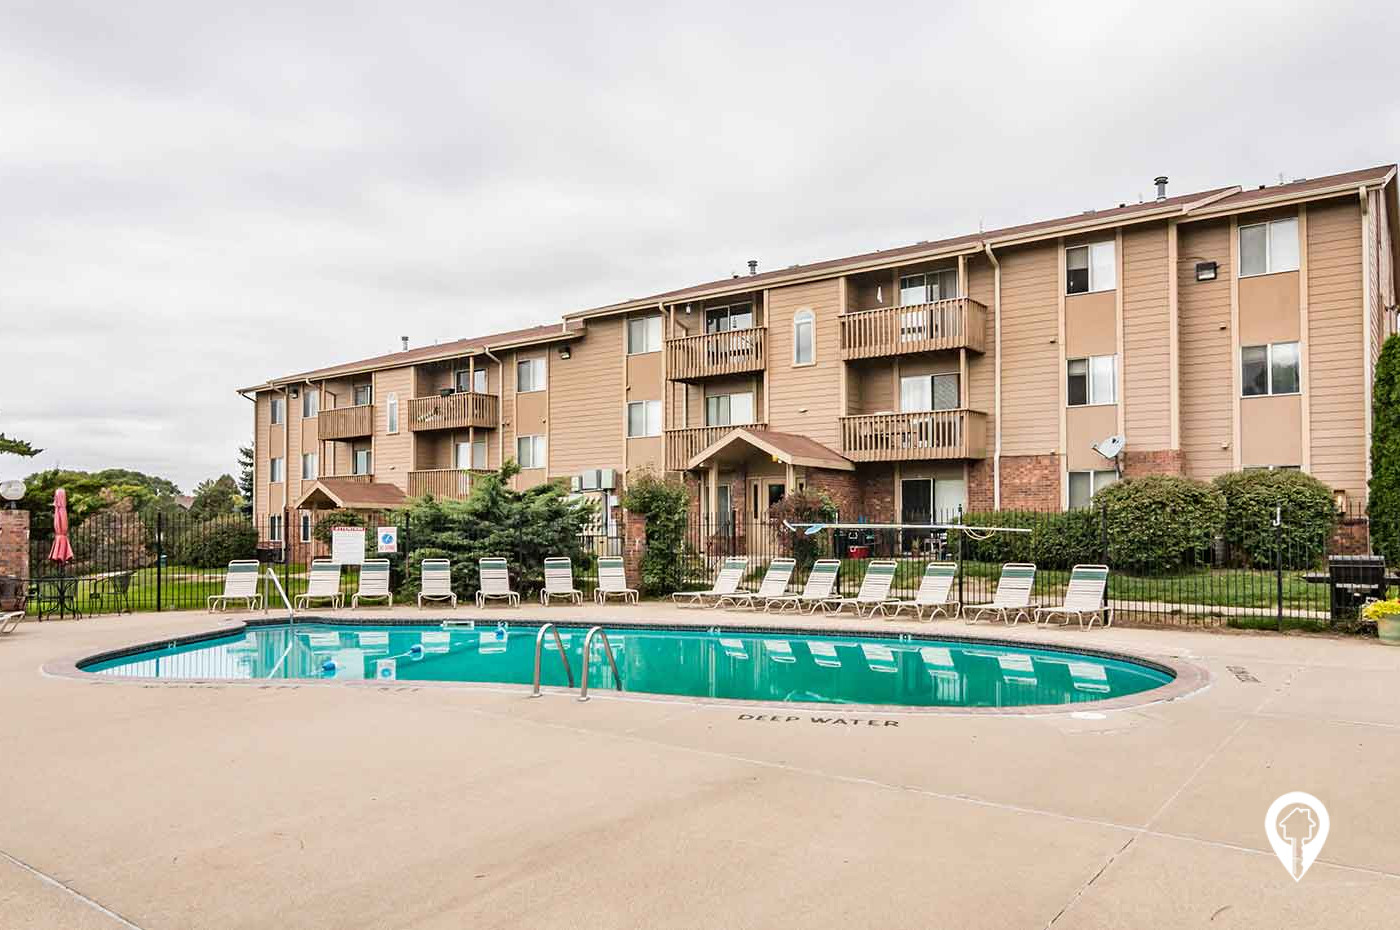 Glen Oaks Apartments in Sioux City, IA - My Renters Guide